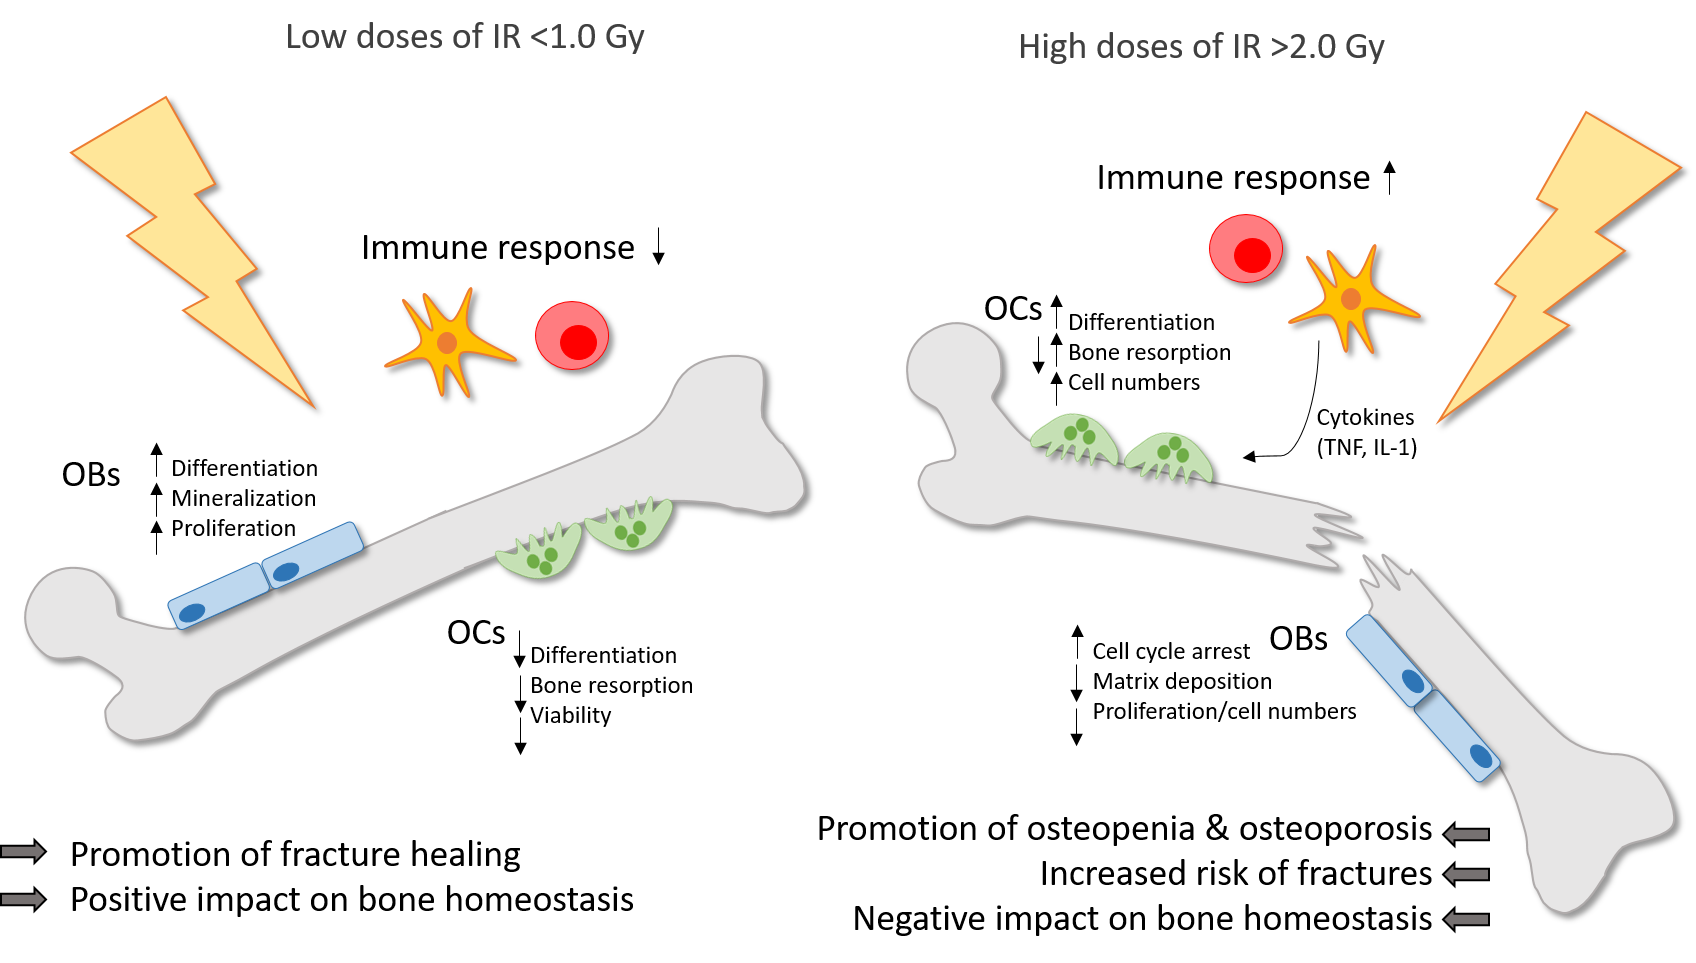 Figure 1. Ionizing radiation (IR) induces differential effects on bone in dependence of the dose. Low doses of IR (<1.0 Gy) are commonly applied for the therapy of chronic degenerative and inflammatory diseases and can counteract the destructive processes on bone with a positive impact on bone homeostasis and a promotion of fracture healing. Preexisting inflammatory processes are downregulated by low doses of IR. Also, the differentiation, mineralization and proliferation of OBs is stimulated. On the contrary, the differentiation, viability and bone resorbing capacity of OCs is reduced. In high doses (>2.0 Gy), IR is applied usually in cancer therapy and has a negative impact on bone homeostasis with a higher risk of osteopenia and osteoporosis and finally an increased fracture risk. In OCs, the differentiation, bone resorption and cell numbers are enhanced, whereas in OBs, the matrix deposition and proliferation rate in reduced and cell cycle arrest is induced. Also, high doses of IR induce the secretion of pro-inflammatory cytokines by immune cells, which in turn can stimulate OCs.